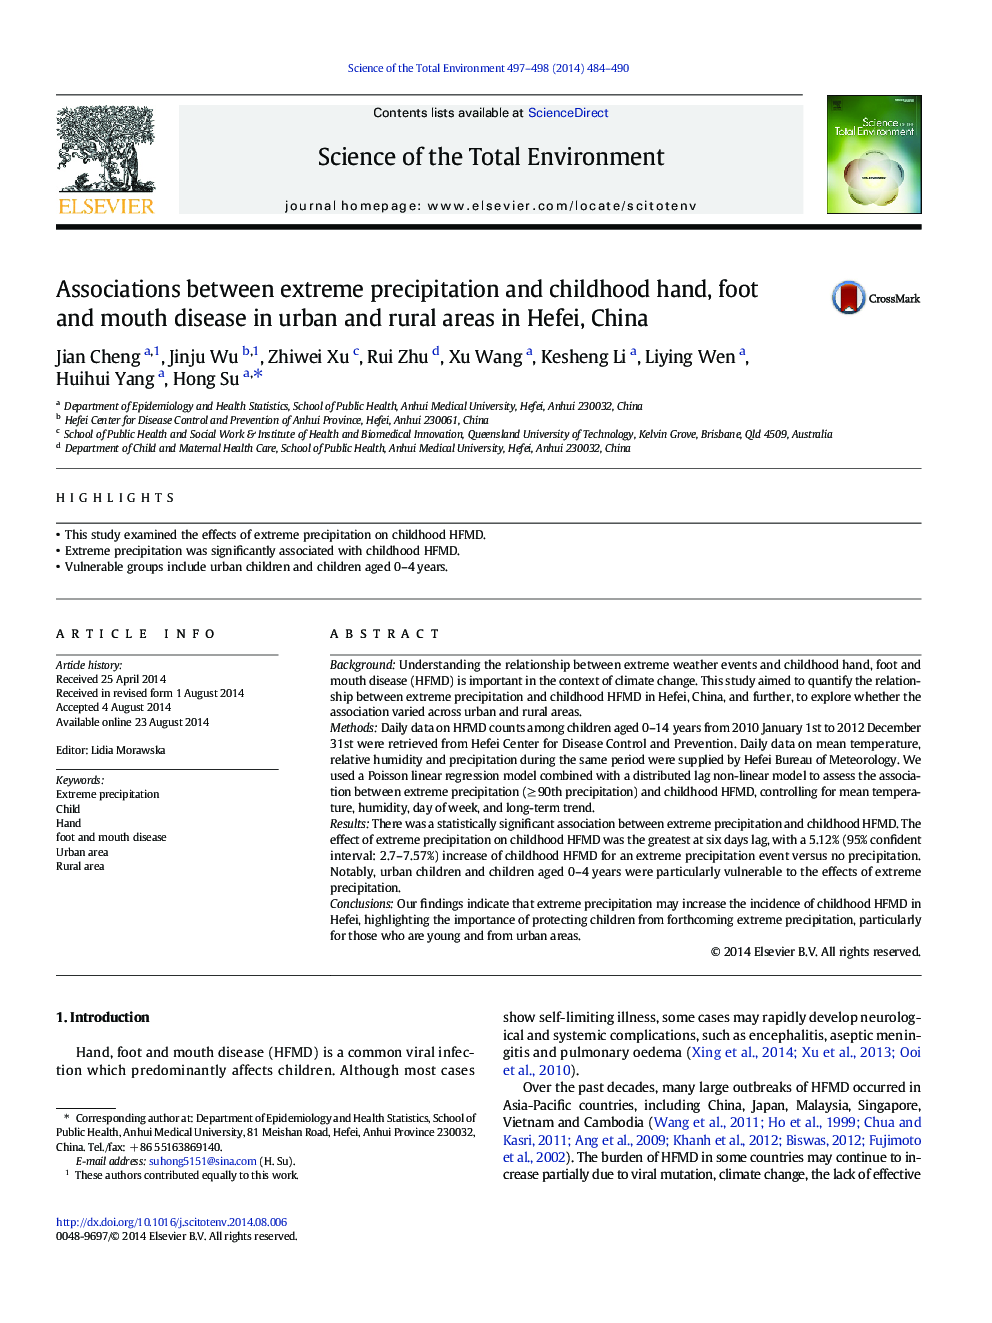 Associations between extreme precipitation and childhood hand, foot and mouth disease in urban and rural areas in Hefei, China